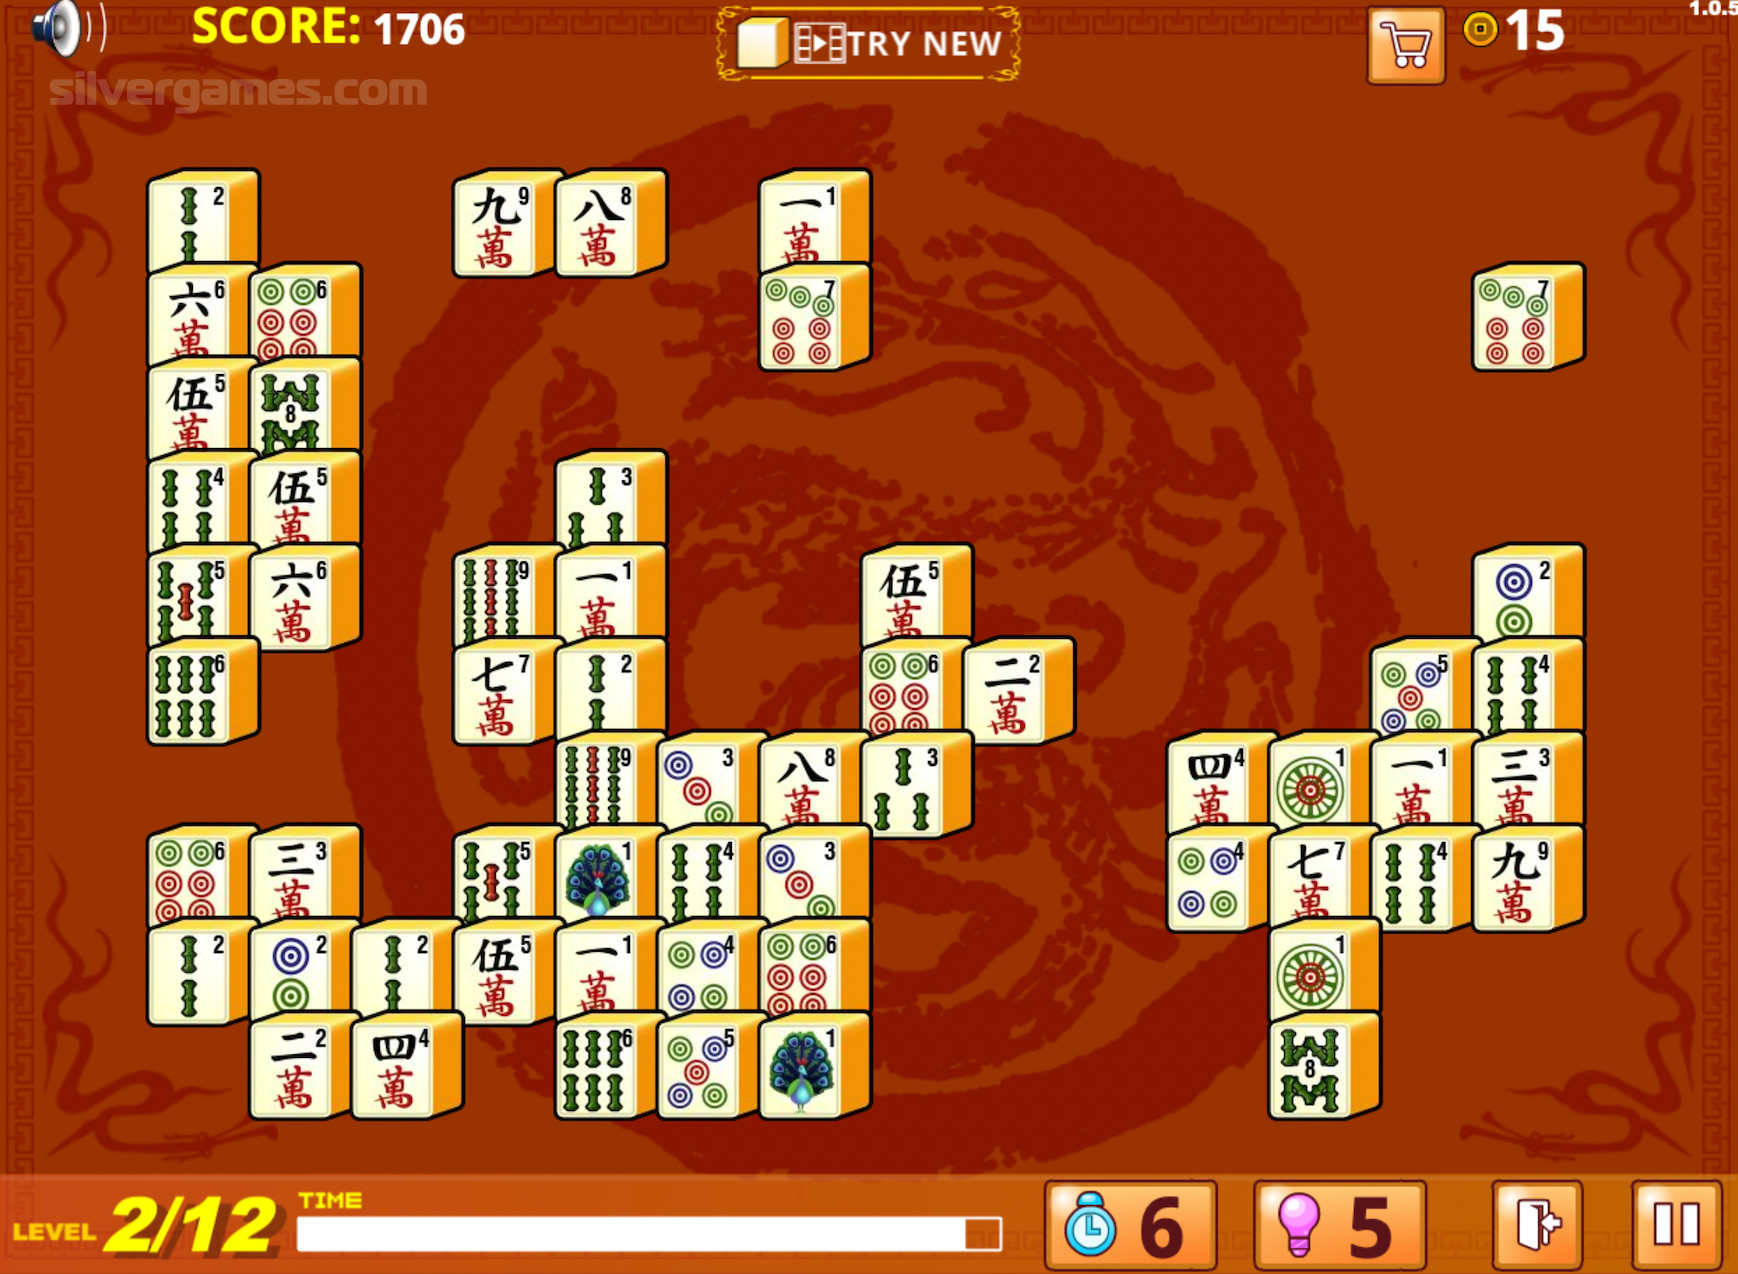 Connect Deluxe Play Mahjong Connect Deluxe Online on SilverGames